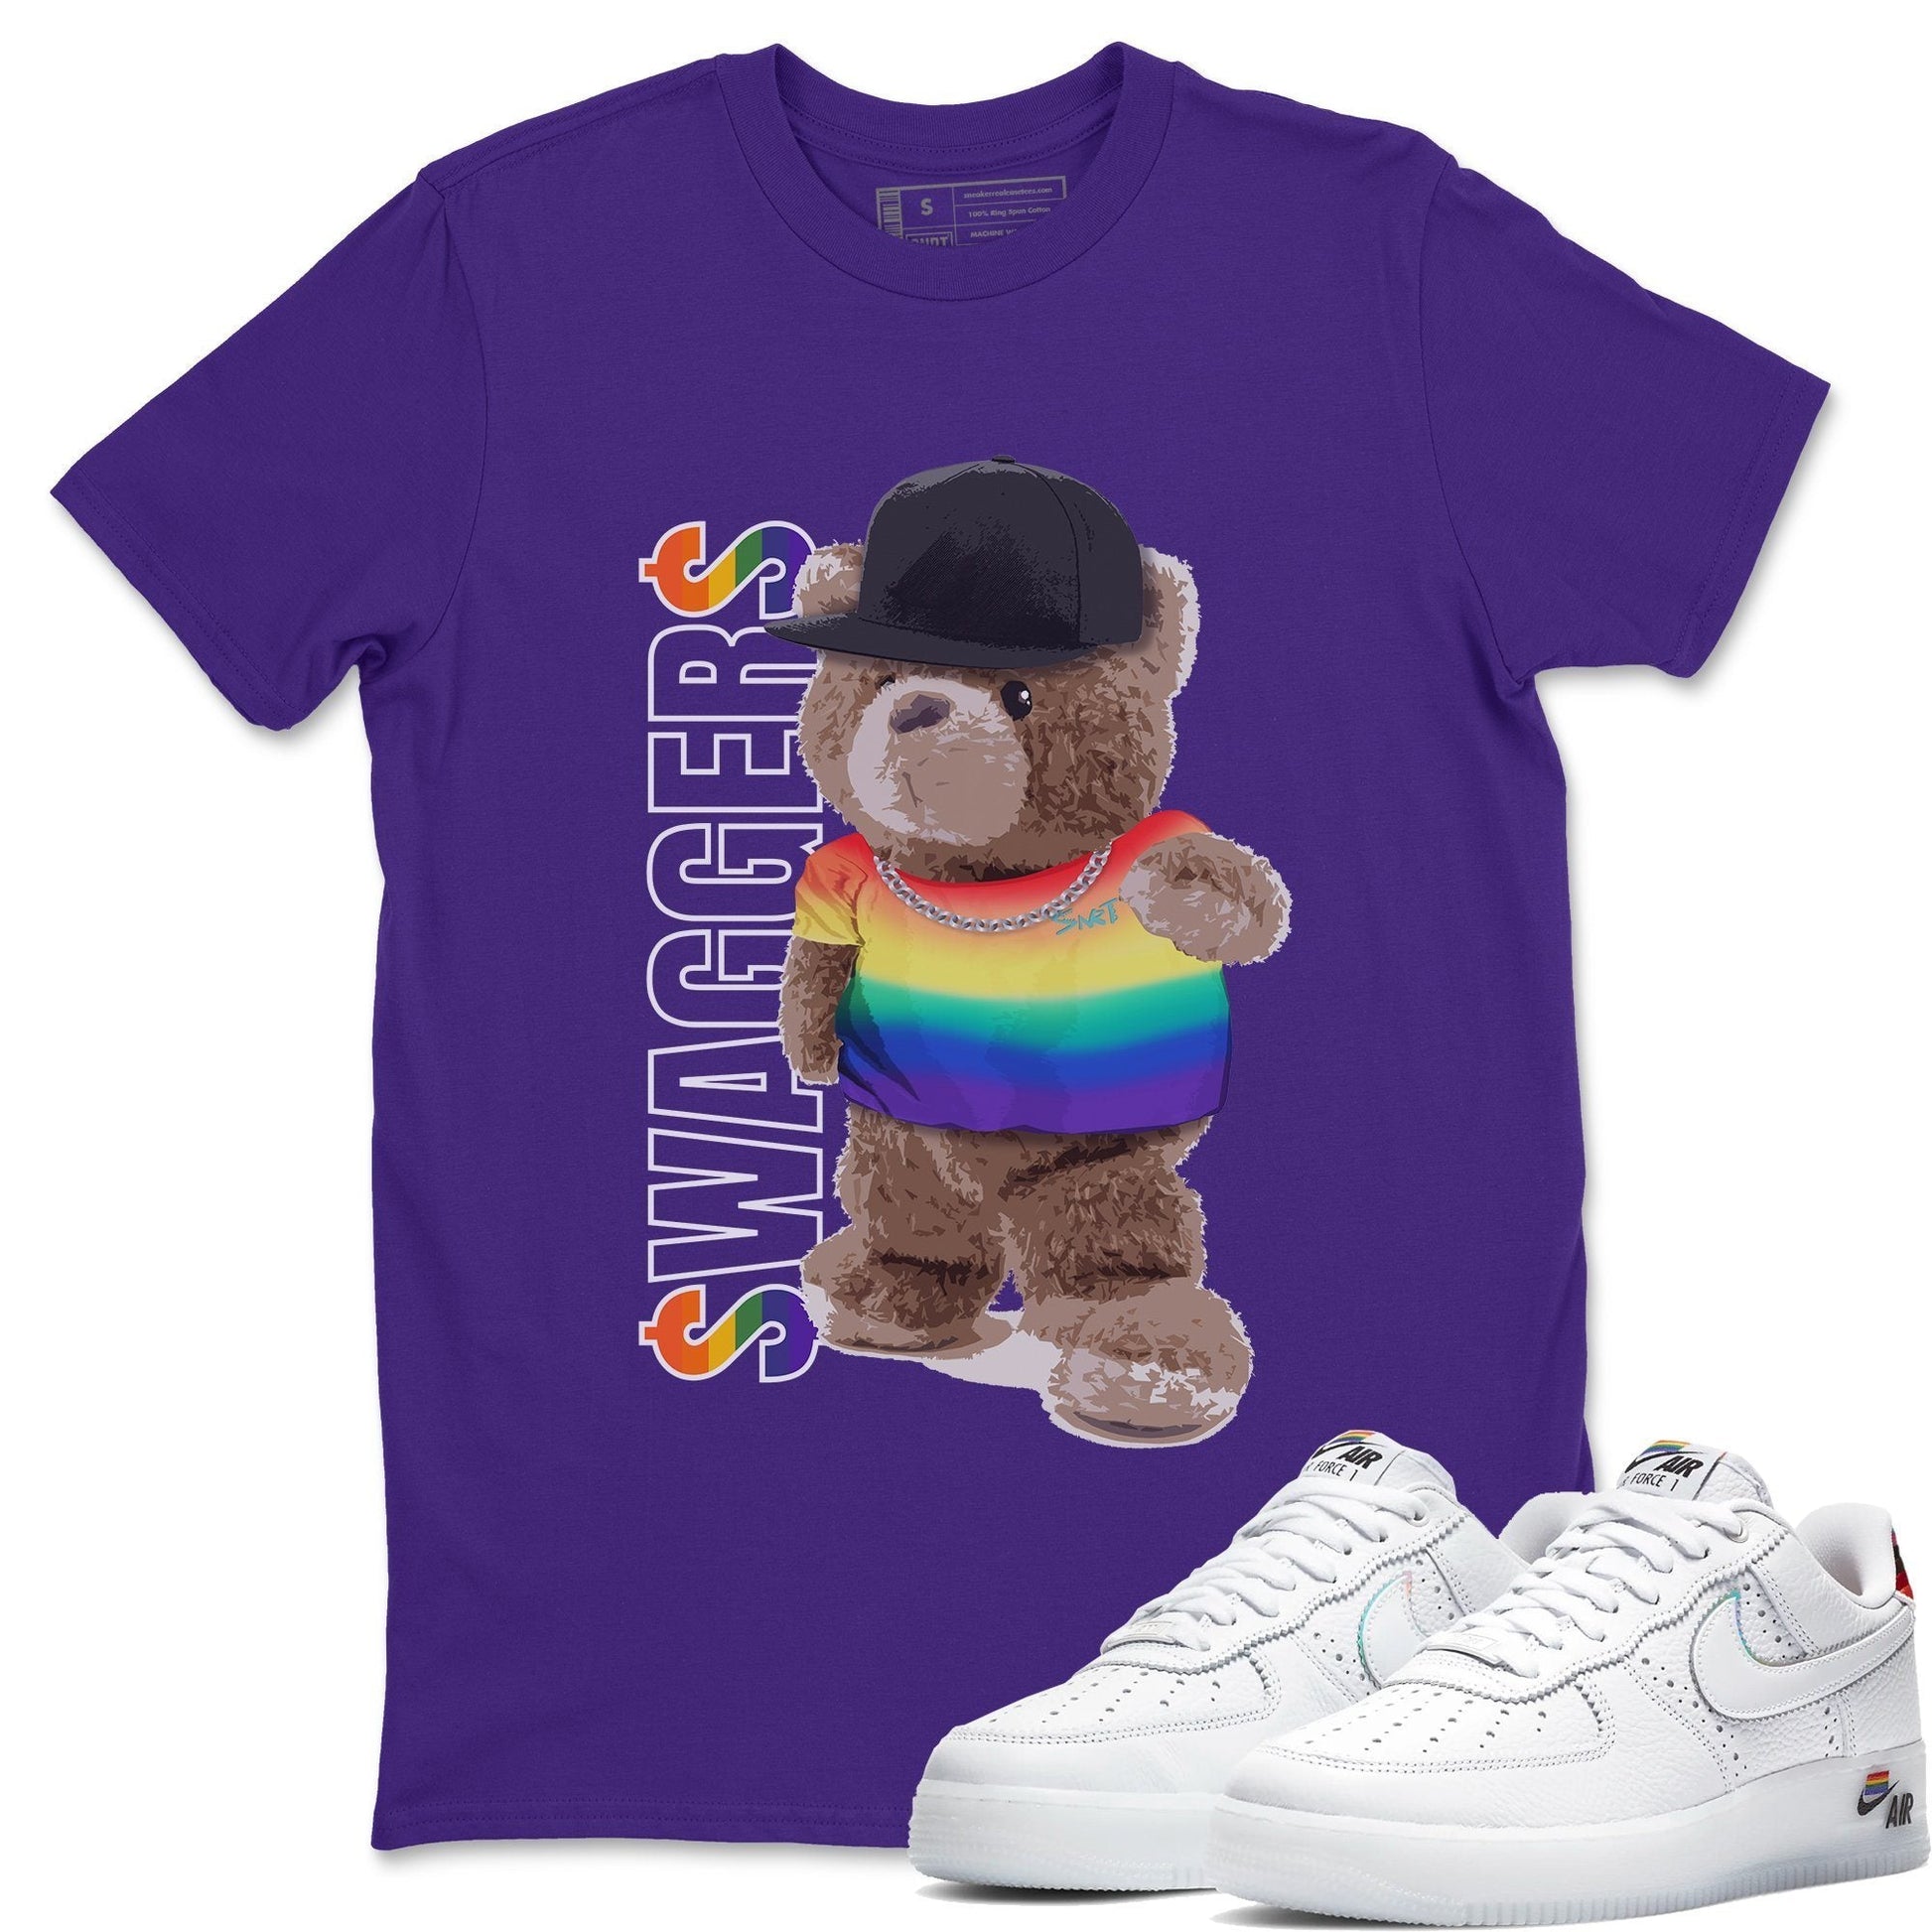 Force 1 Betrue Sneaker Match Tees Bear Swaggers Sneaker Tees Force 1 Betrue Sneaker Release Tees Unisex Shirts